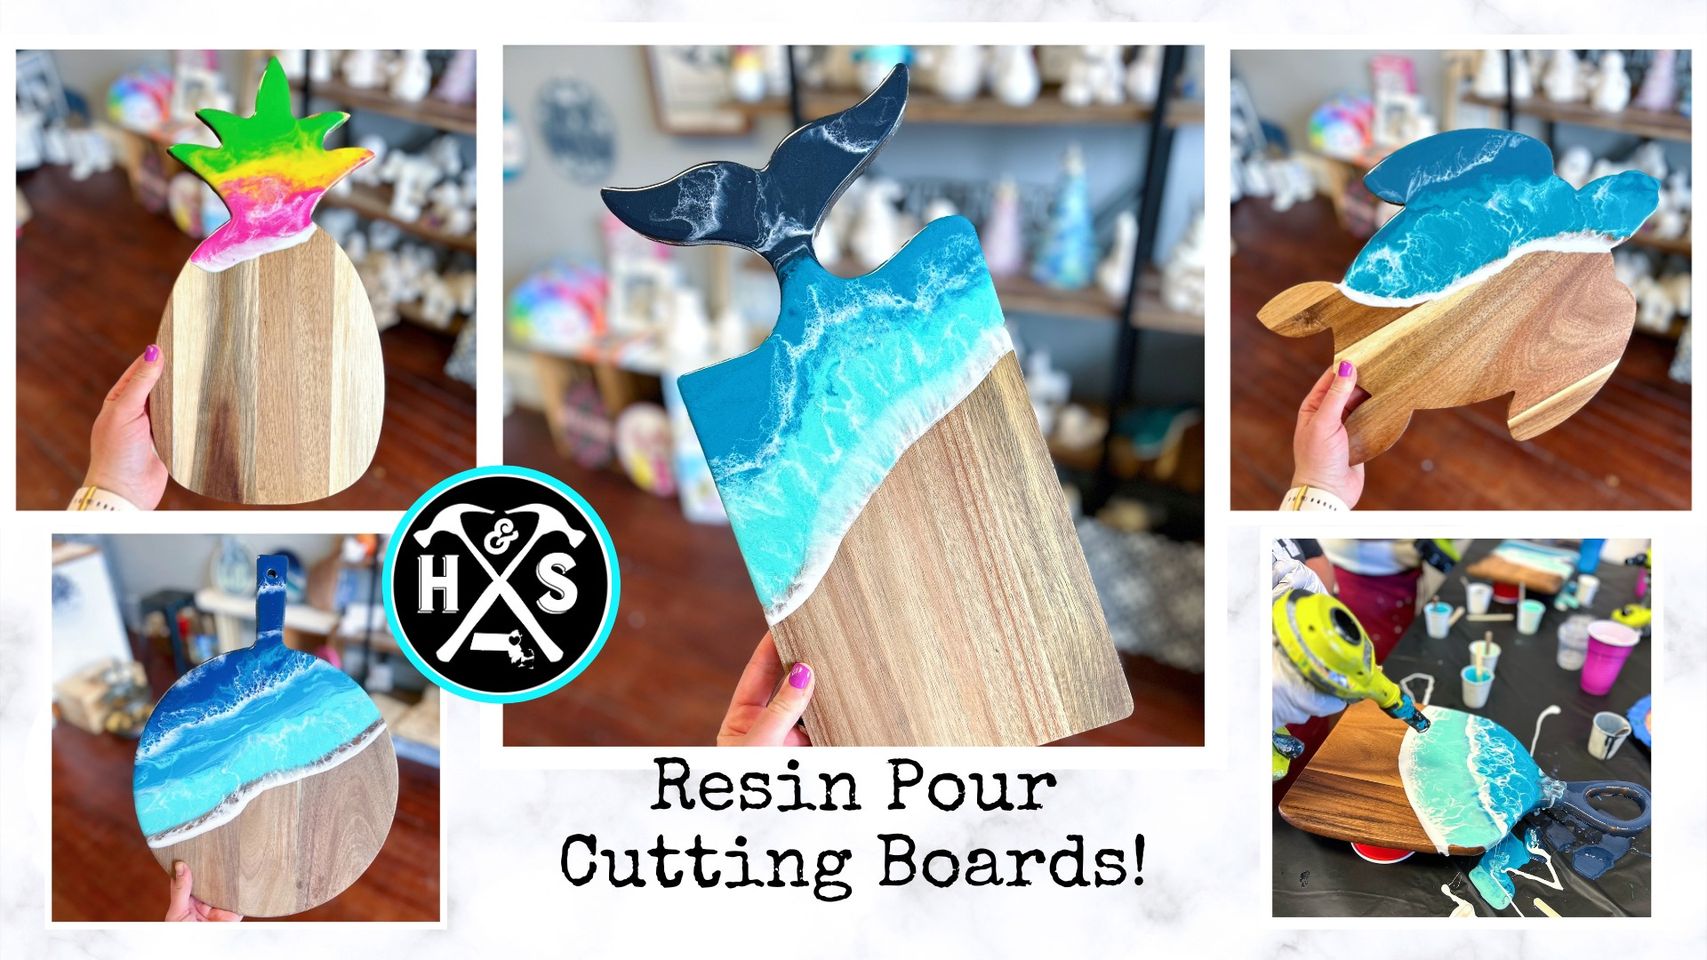 Explore our stunning collection of resin pour cutting boards adorned with unique whale and star patterns. Each board prominently features our "hxs" logo. Dive into an artistic culinary experience with "resin pour cutting boards!